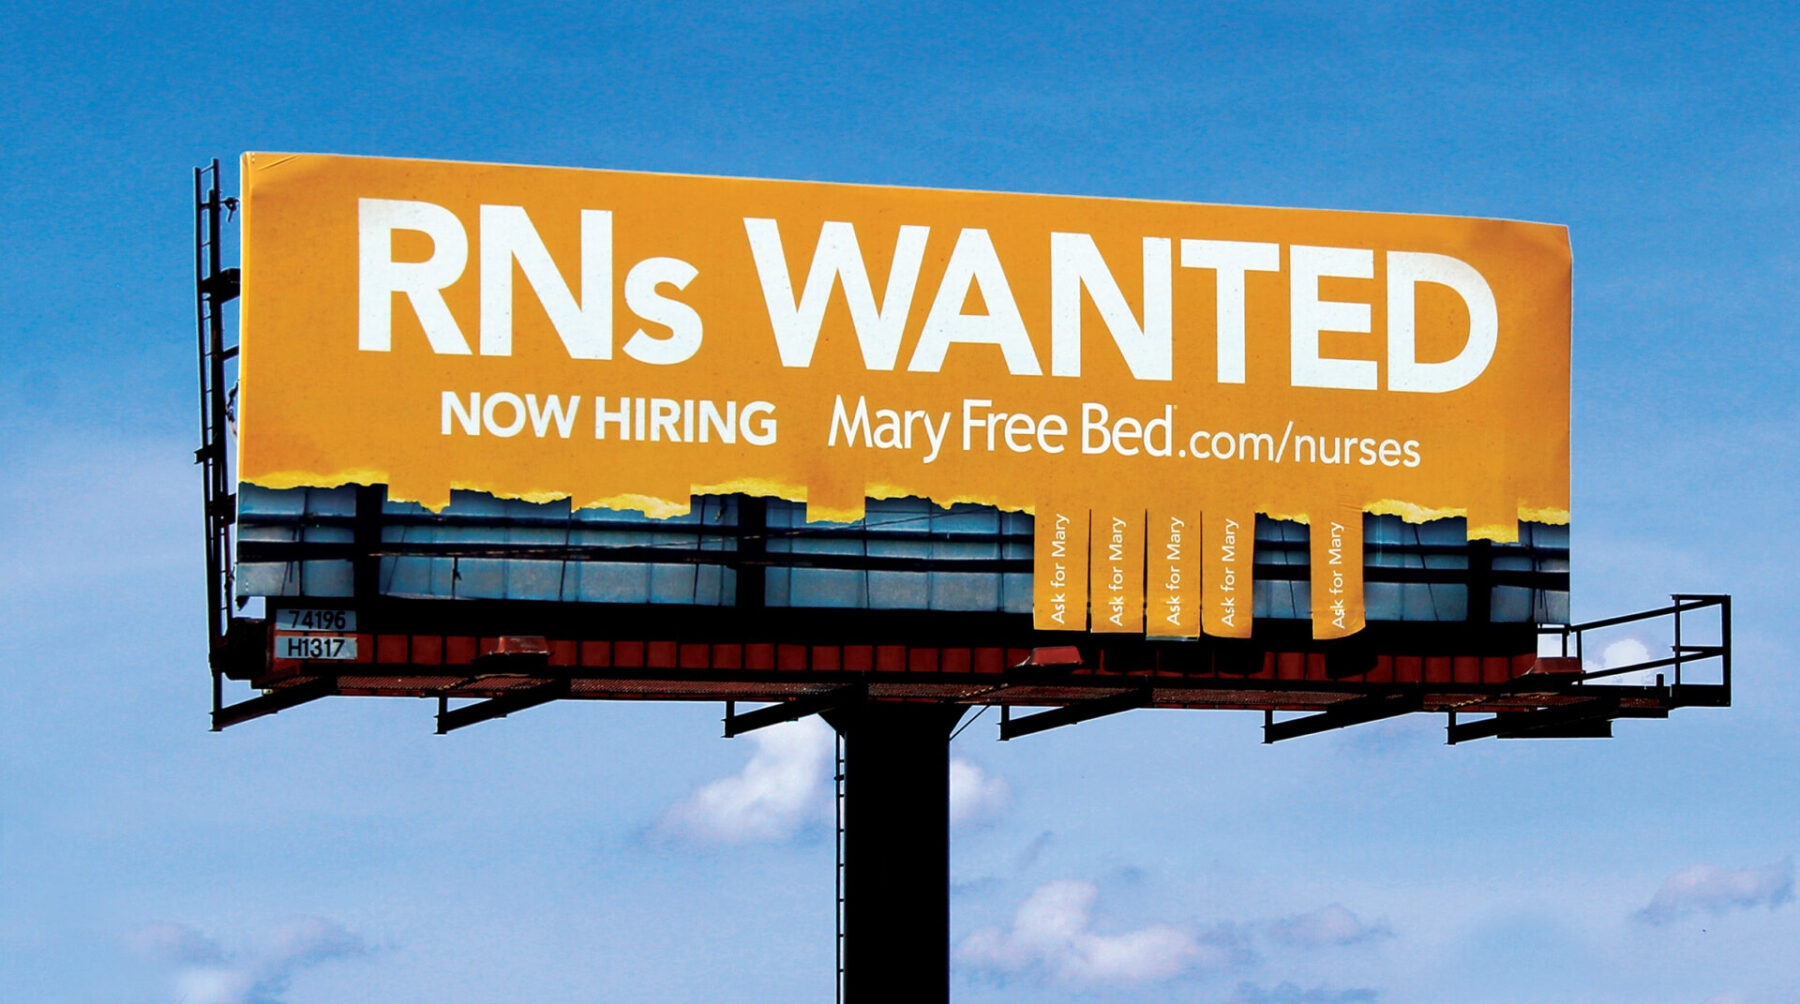 Hiring campaign out of home bulletin design with headline "RNs Wanted" and mimicking tear off tabs from a local flyer.